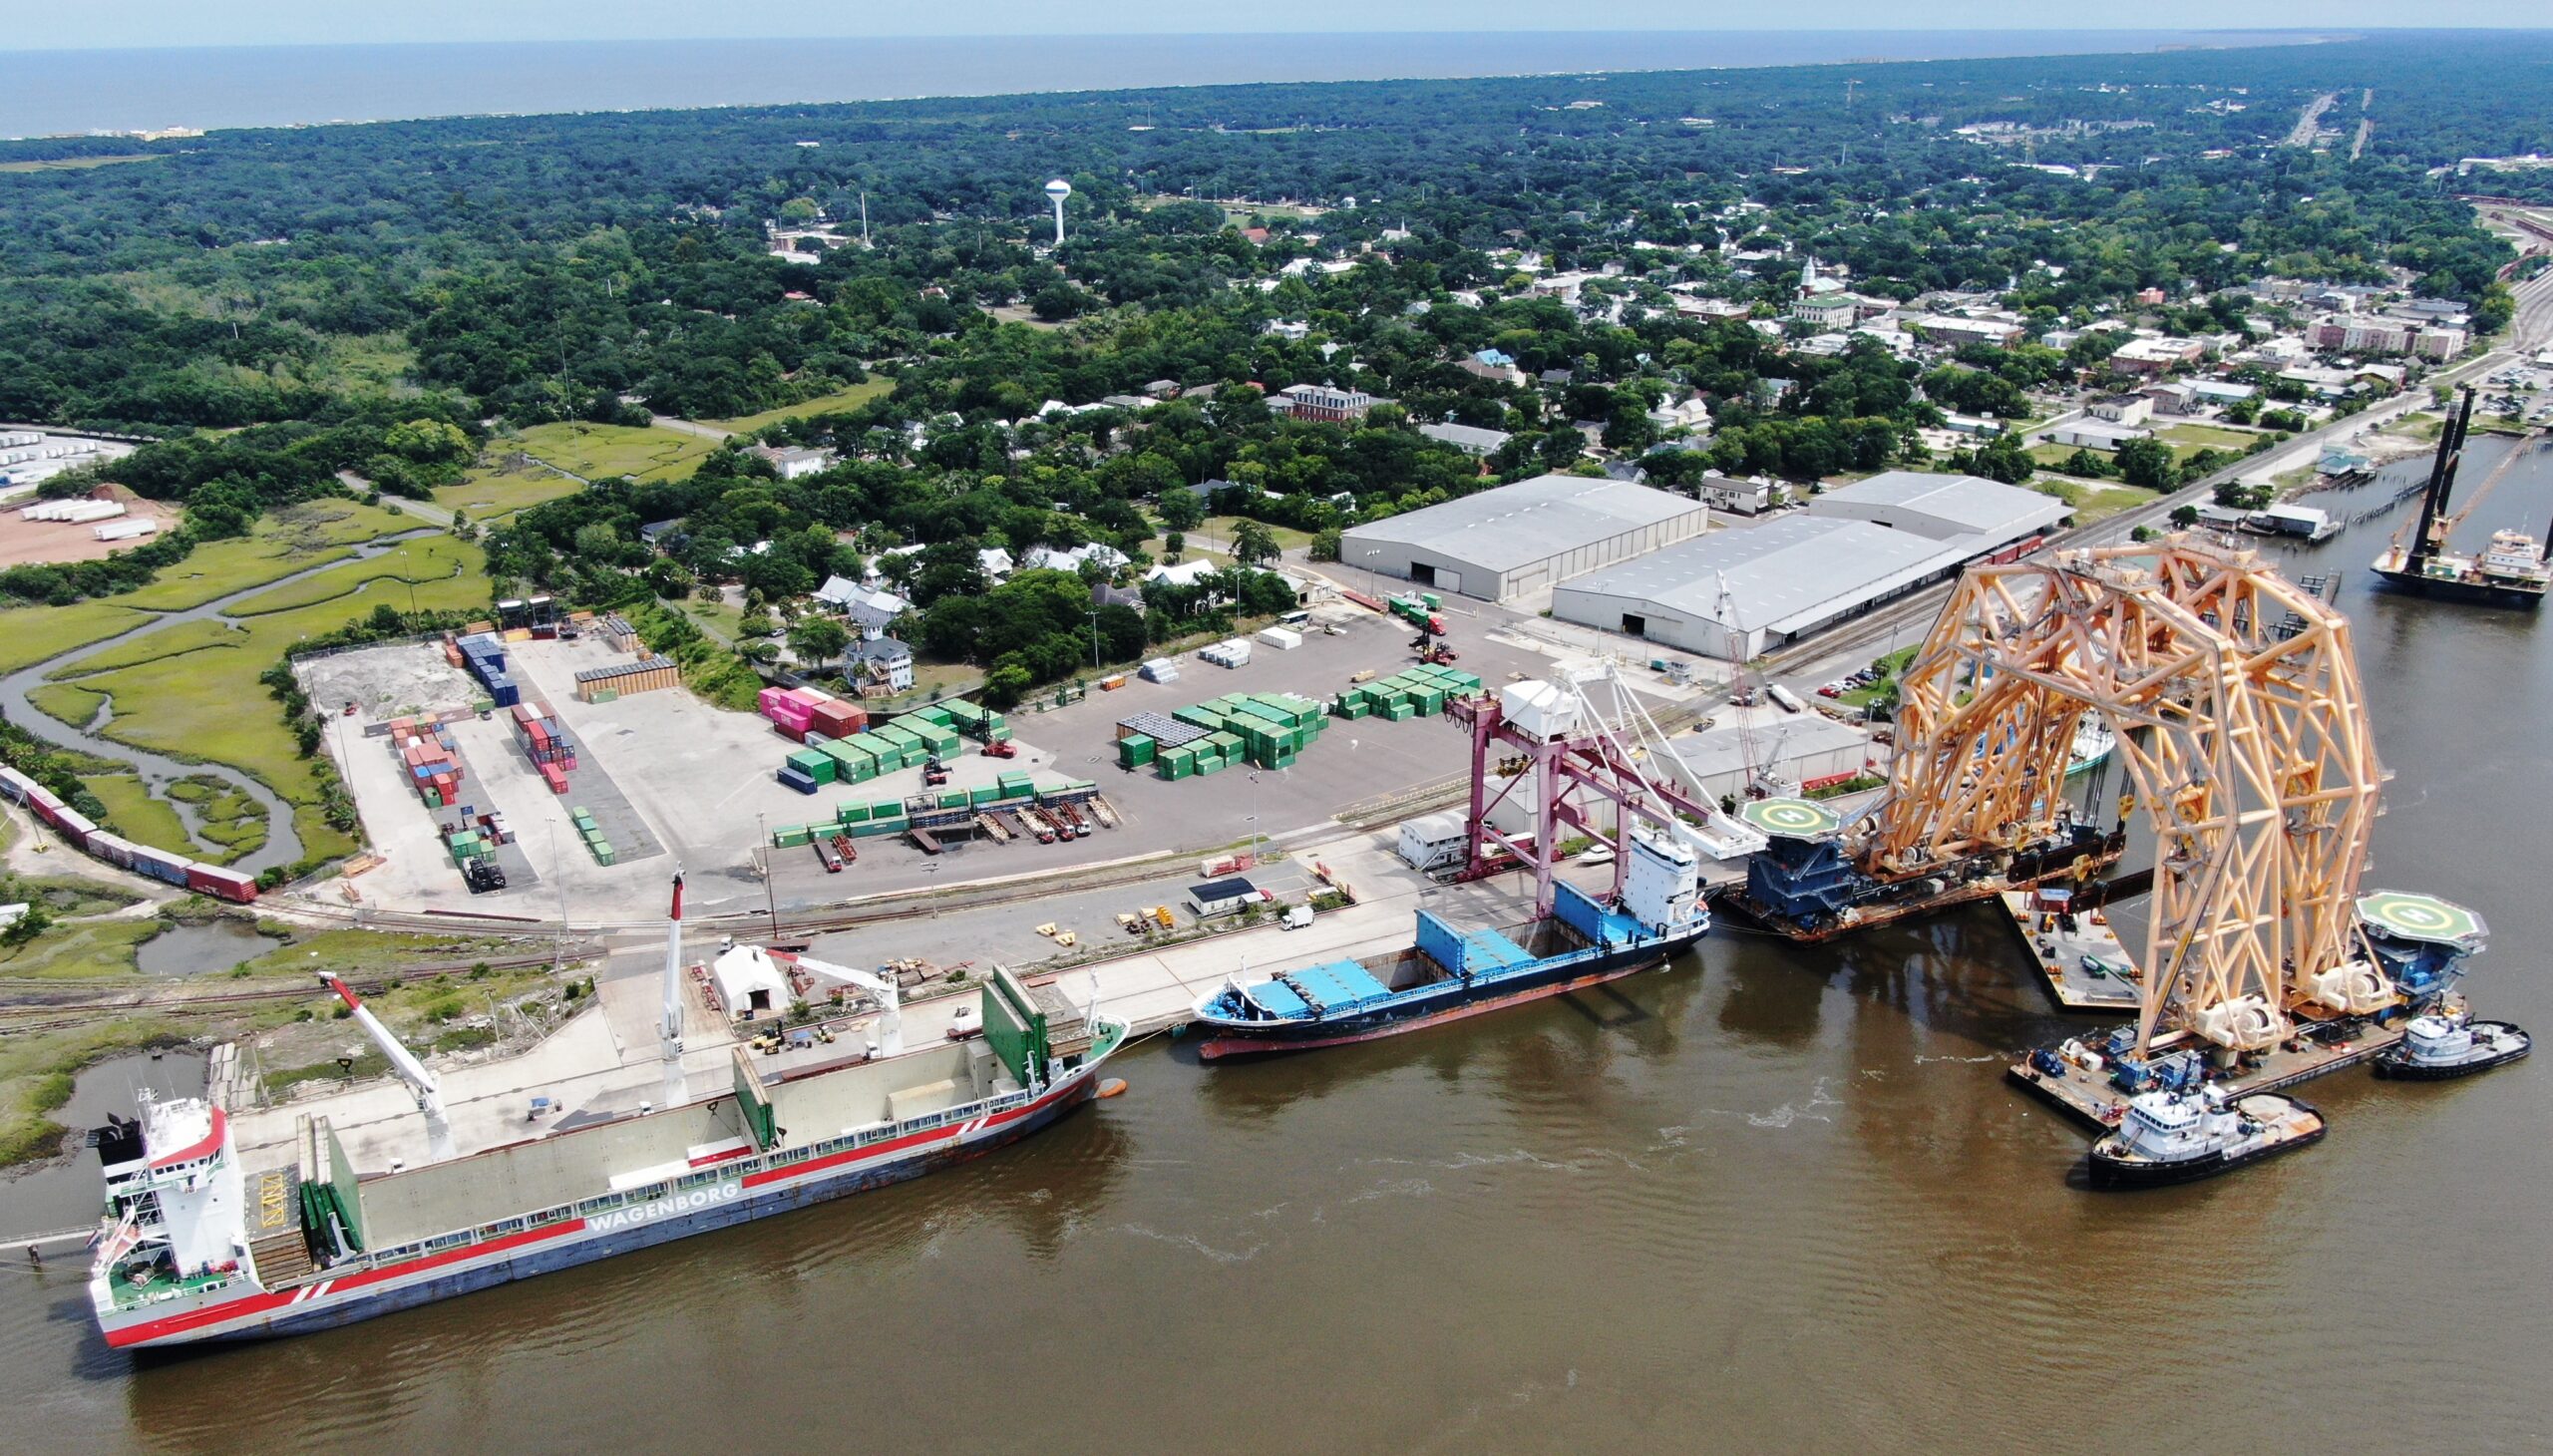 Ridgewood Infrastructure and Savage acquire Worldwide Terminals Fernandina, a critical link in the port supply chain infrastructure